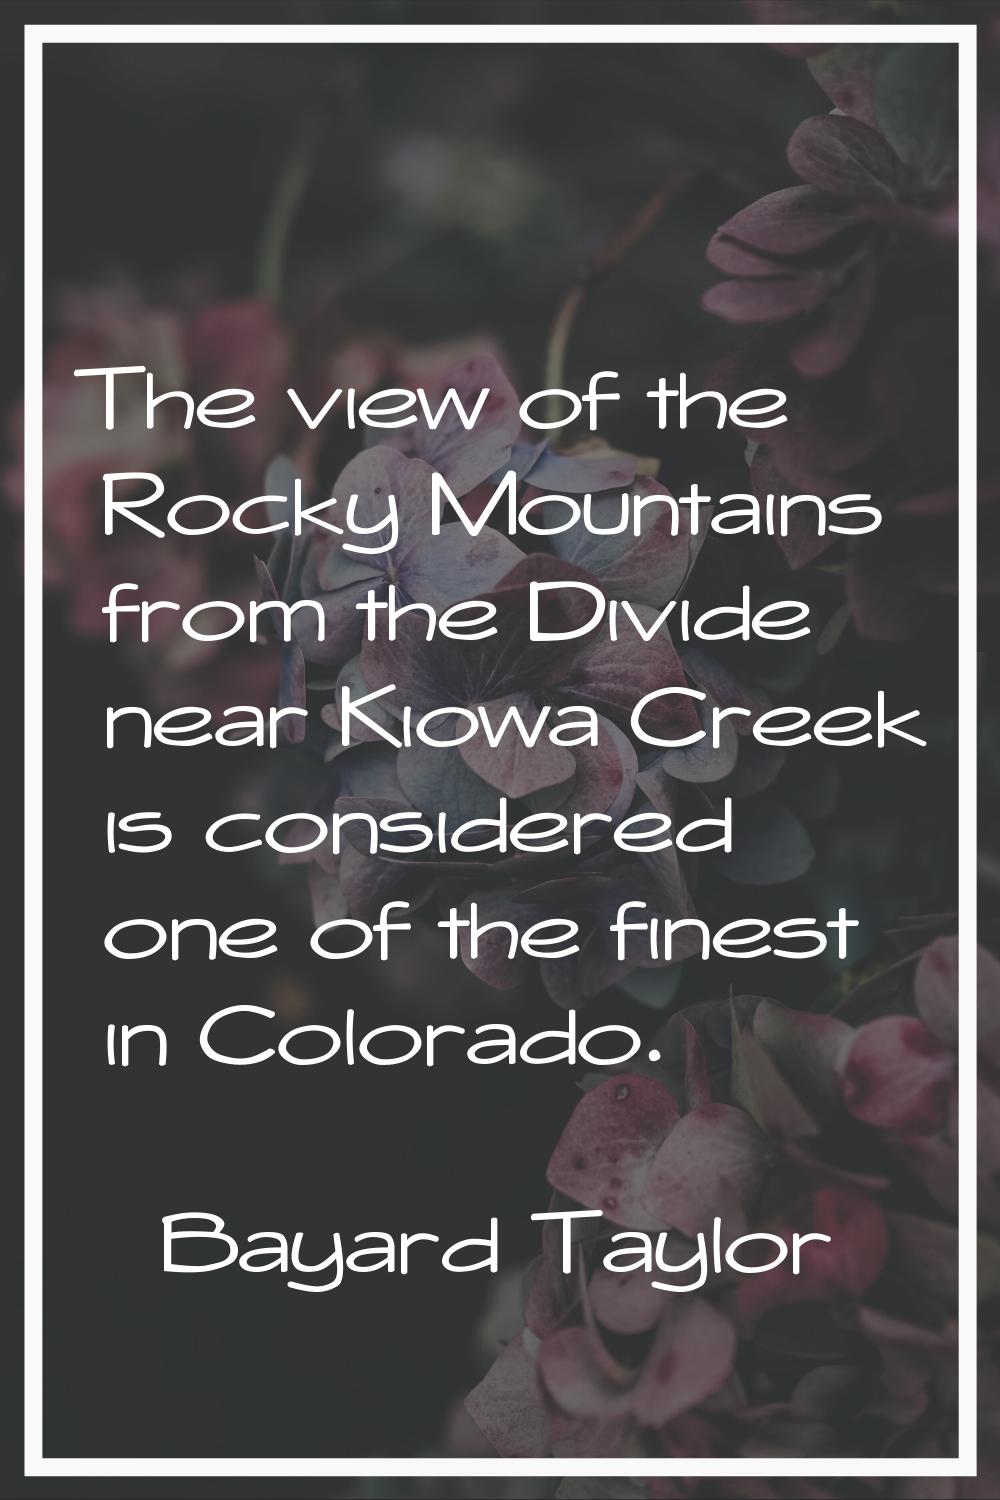 The view of the Rocky Mountains from the Divide near Kiowa Creek is considered one of the finest in